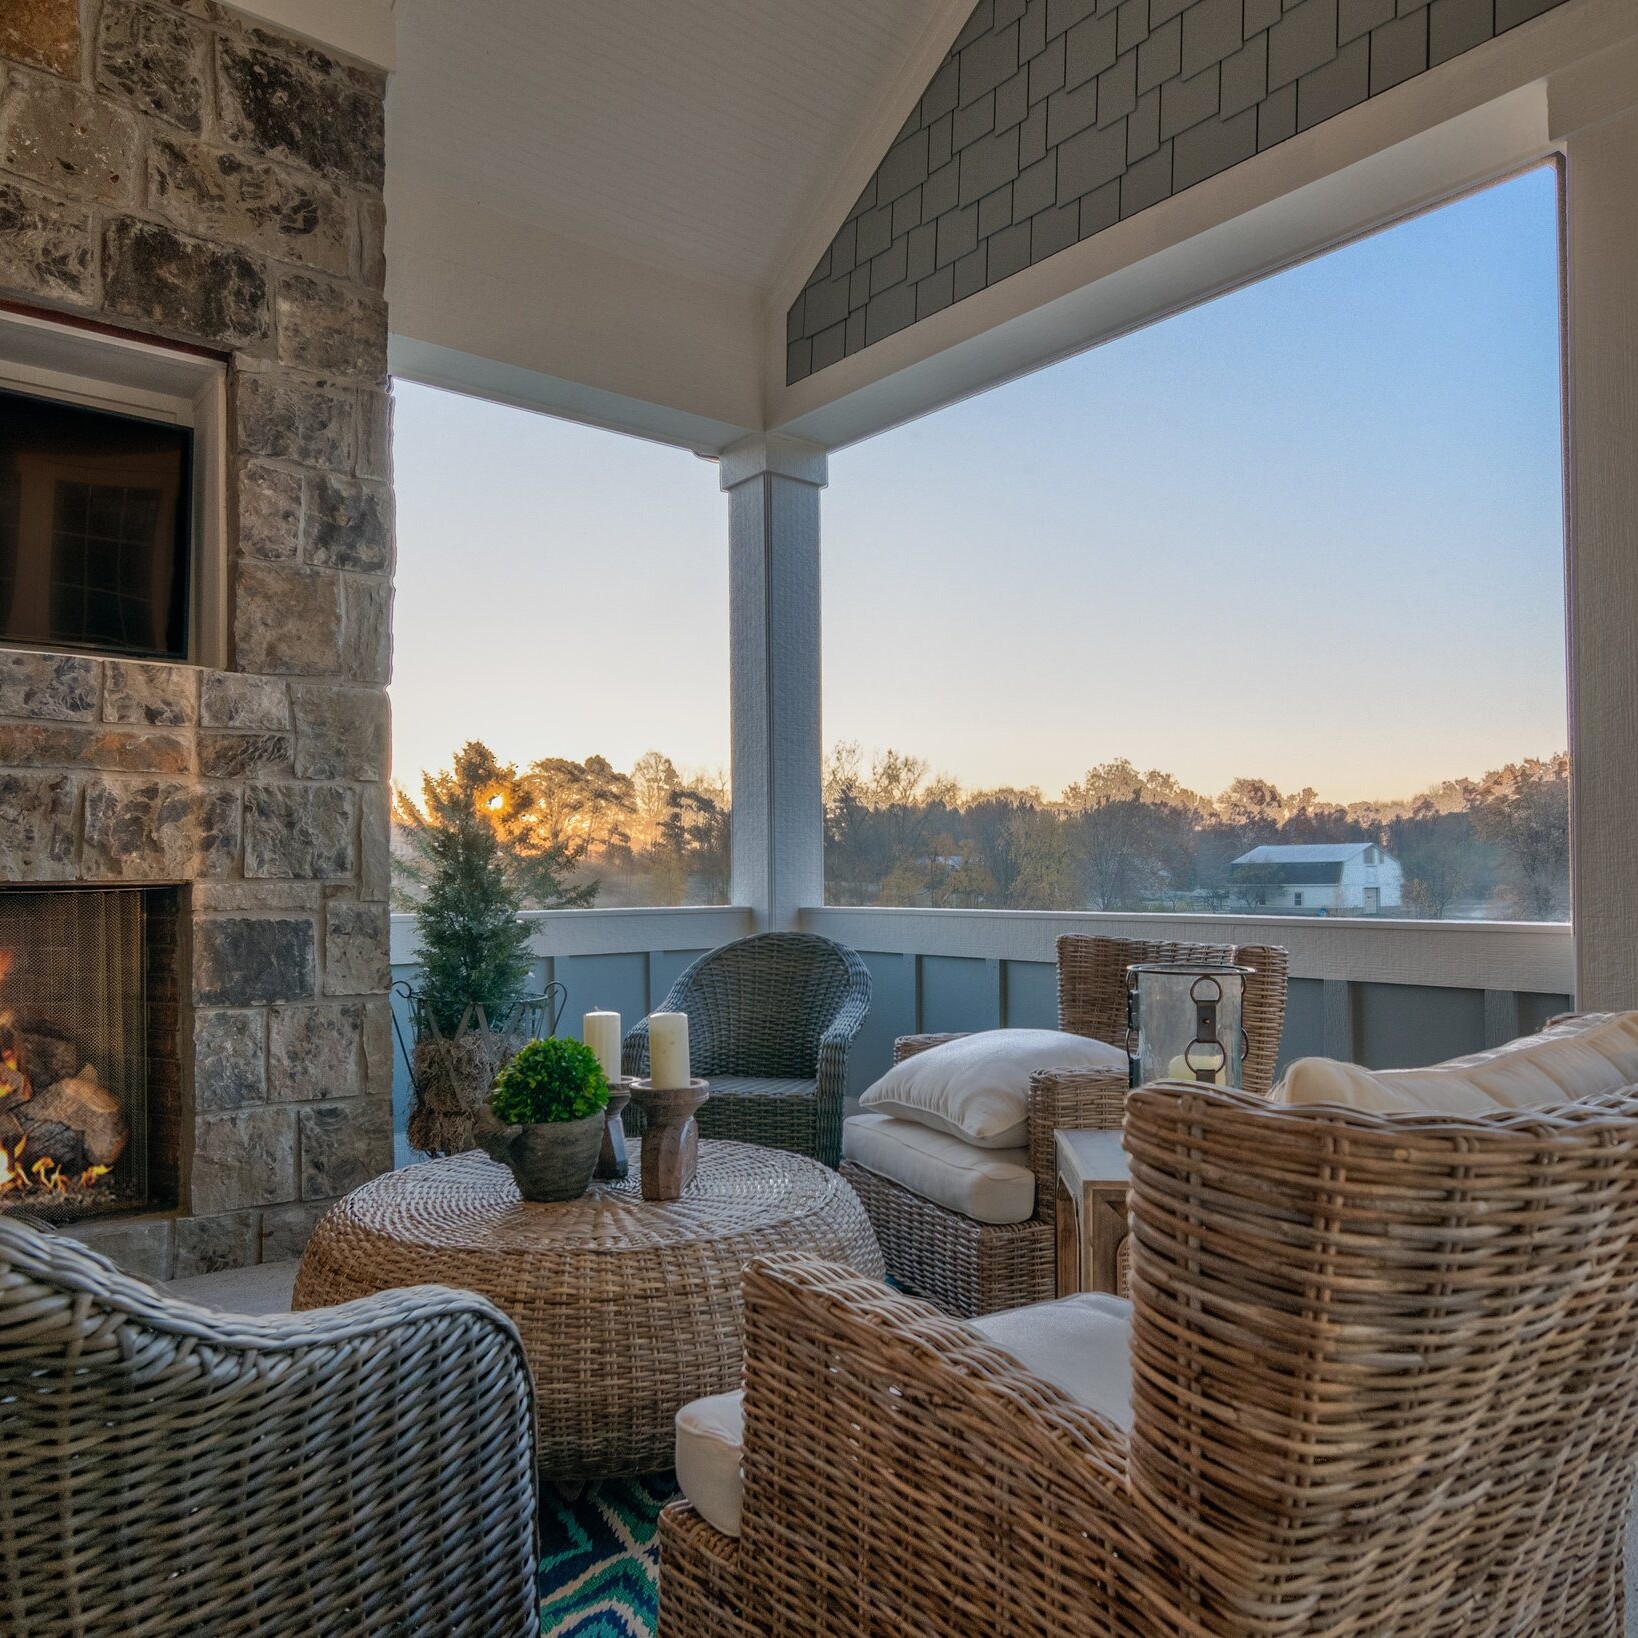 A porch with wicker furniture and a fireplace, perfect for luxury custom homes in Indianapolis.